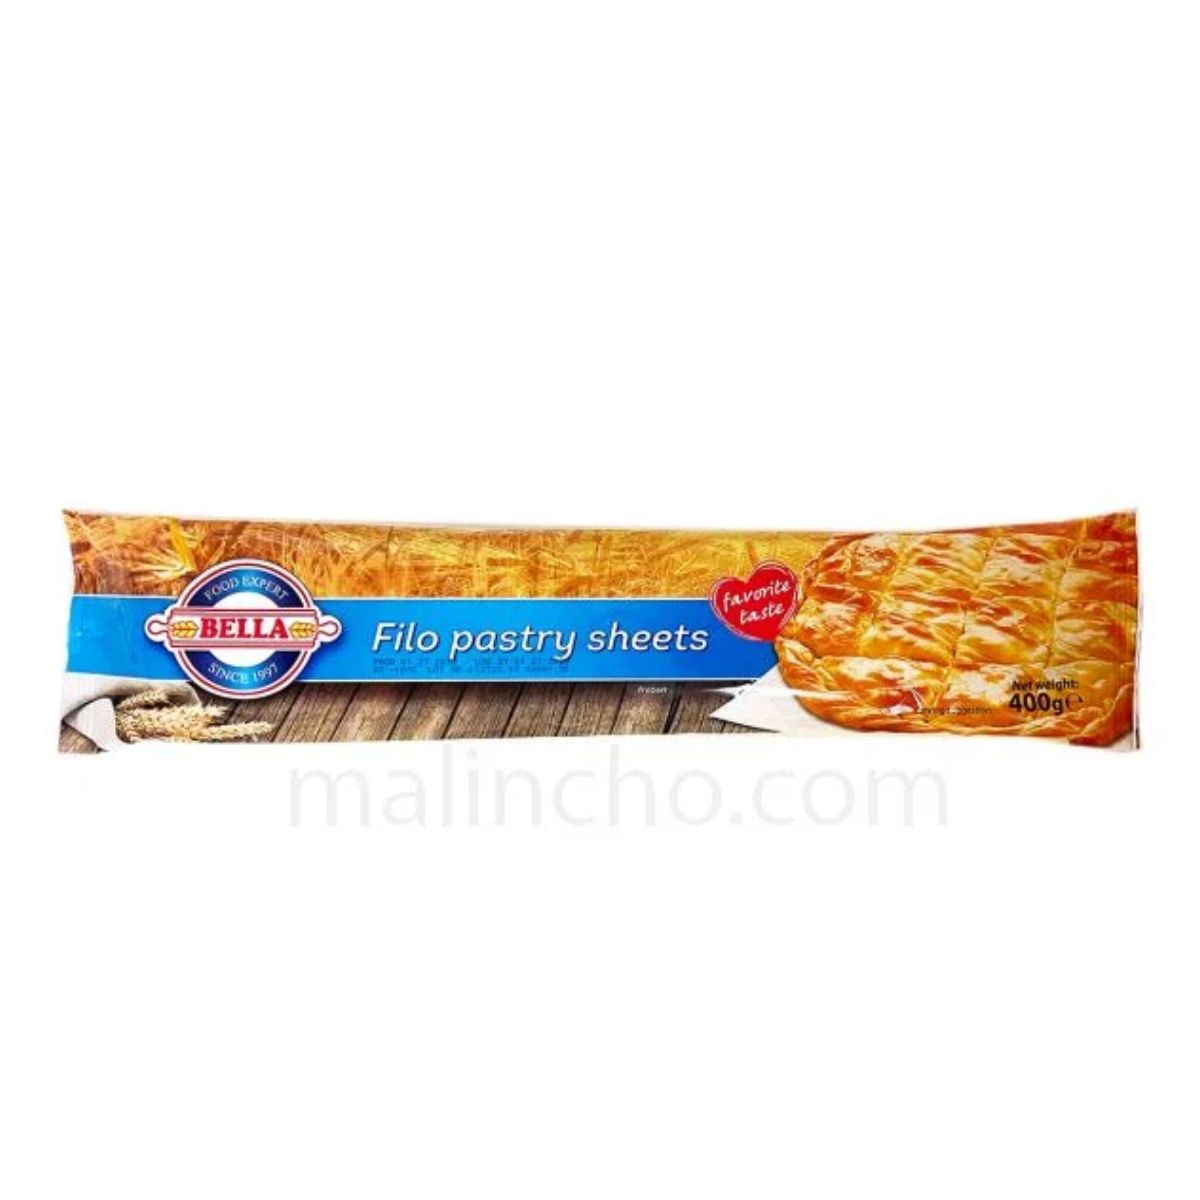 A bag of Bella - Pastry Sheets - 400g with a label on it.